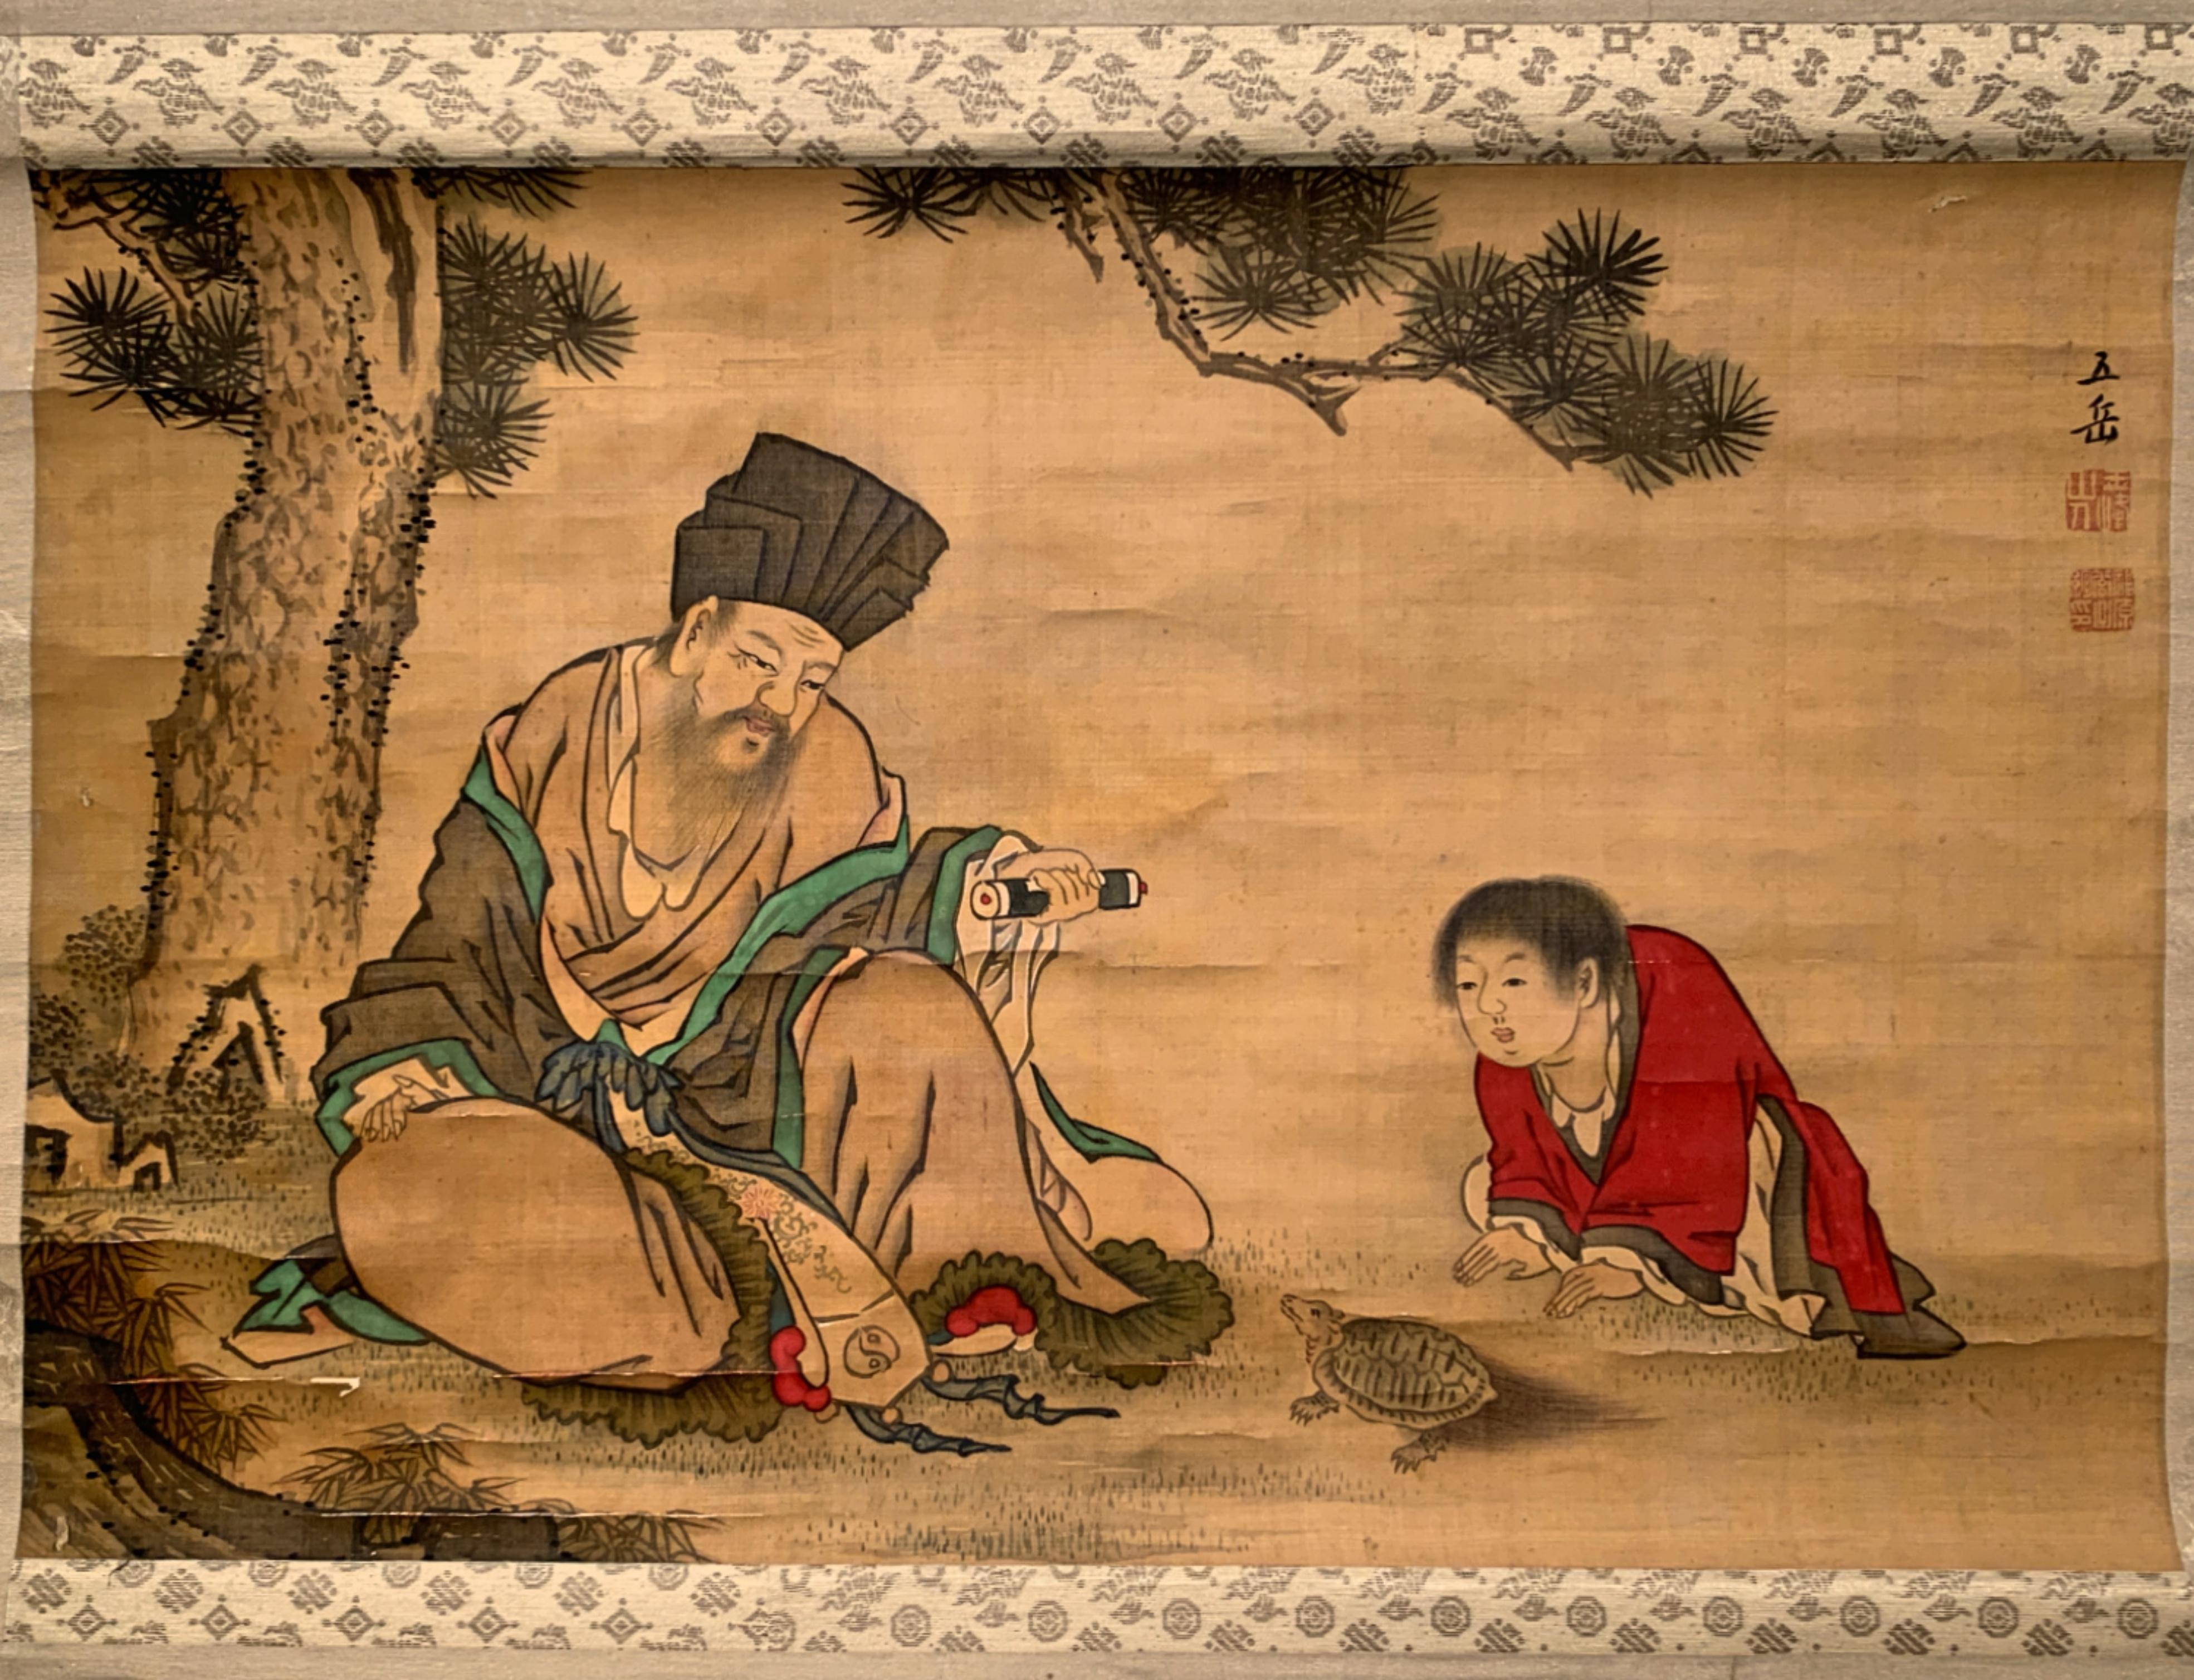 A Japanese hanging scroll painting, kakemono or kakejiku, of a Taoist scholar and student, by Fukuhara Gogaku (1730-1799), ink and color on silk, signed Gogaku, with two seals of the artist, Edo Period, late 18th century, Japan. 

The painting